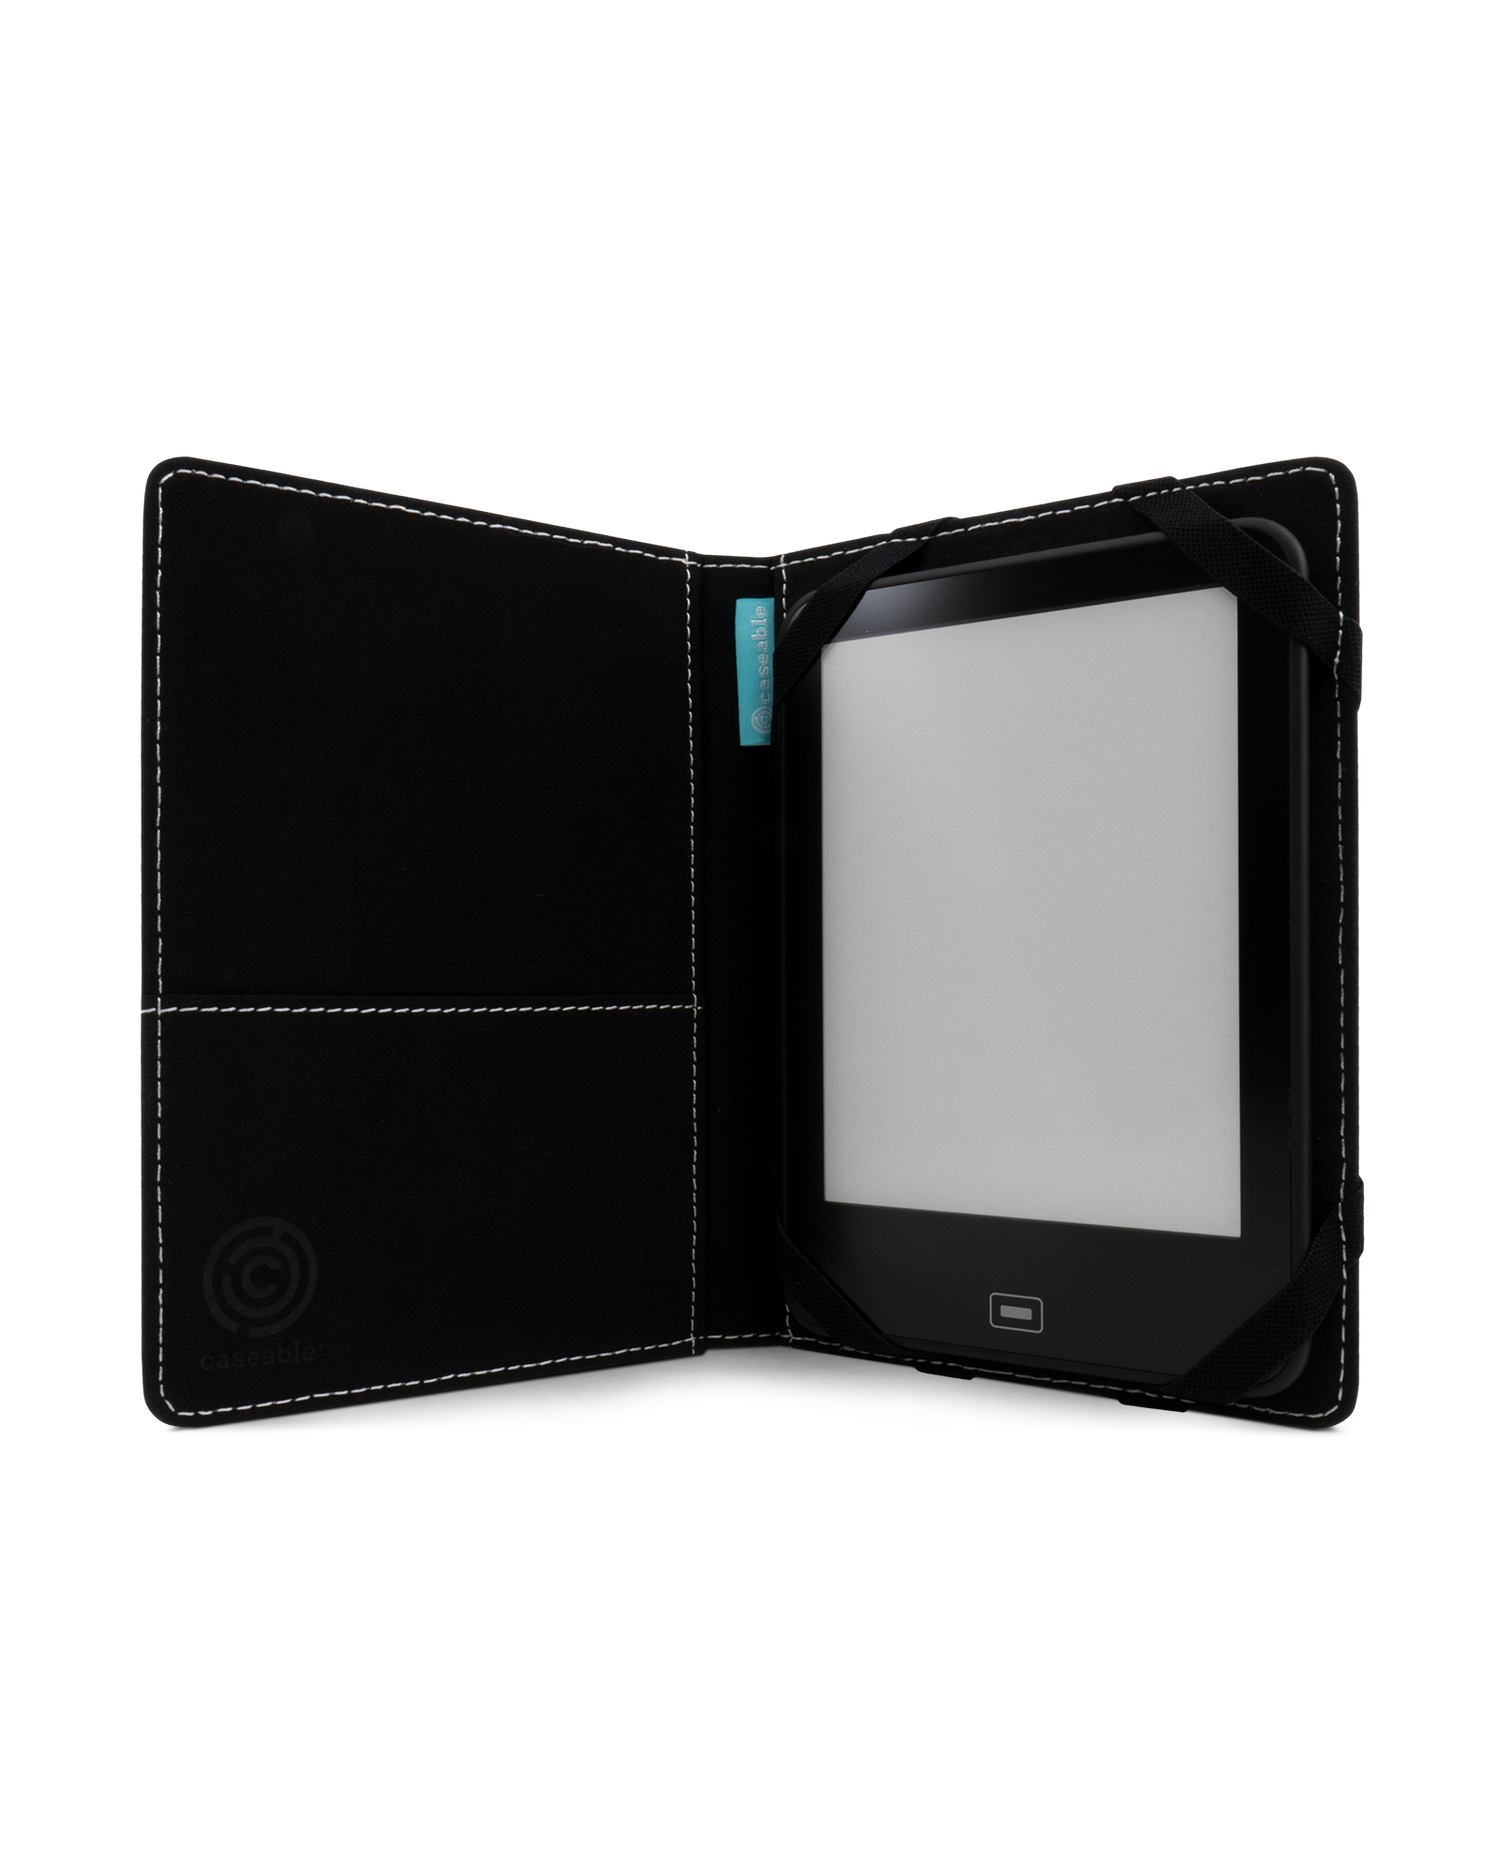 Cool Blues eReader Case S: Opened interior view